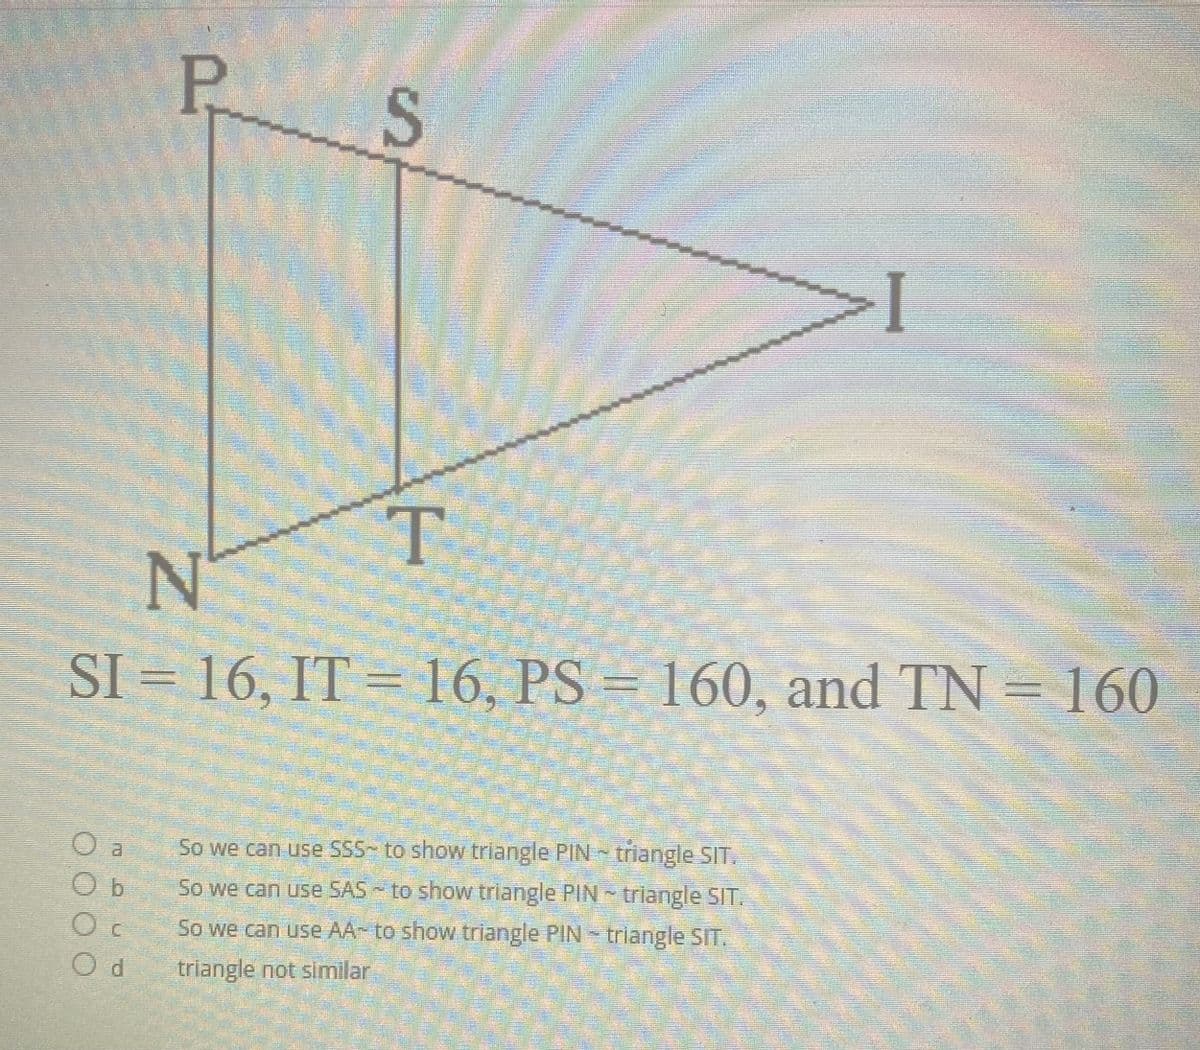 P S
T.
N°
SI = 16, IT =16, PS
= 160, and TN = 160
a.
So we can use SSS- to show triangle PIN triangle SIT.
O b
So we can use SAS to show triangle PIN triangle SIT.
So we can use AA- to show triangle PIN triangle SIT.
triangle not similar
